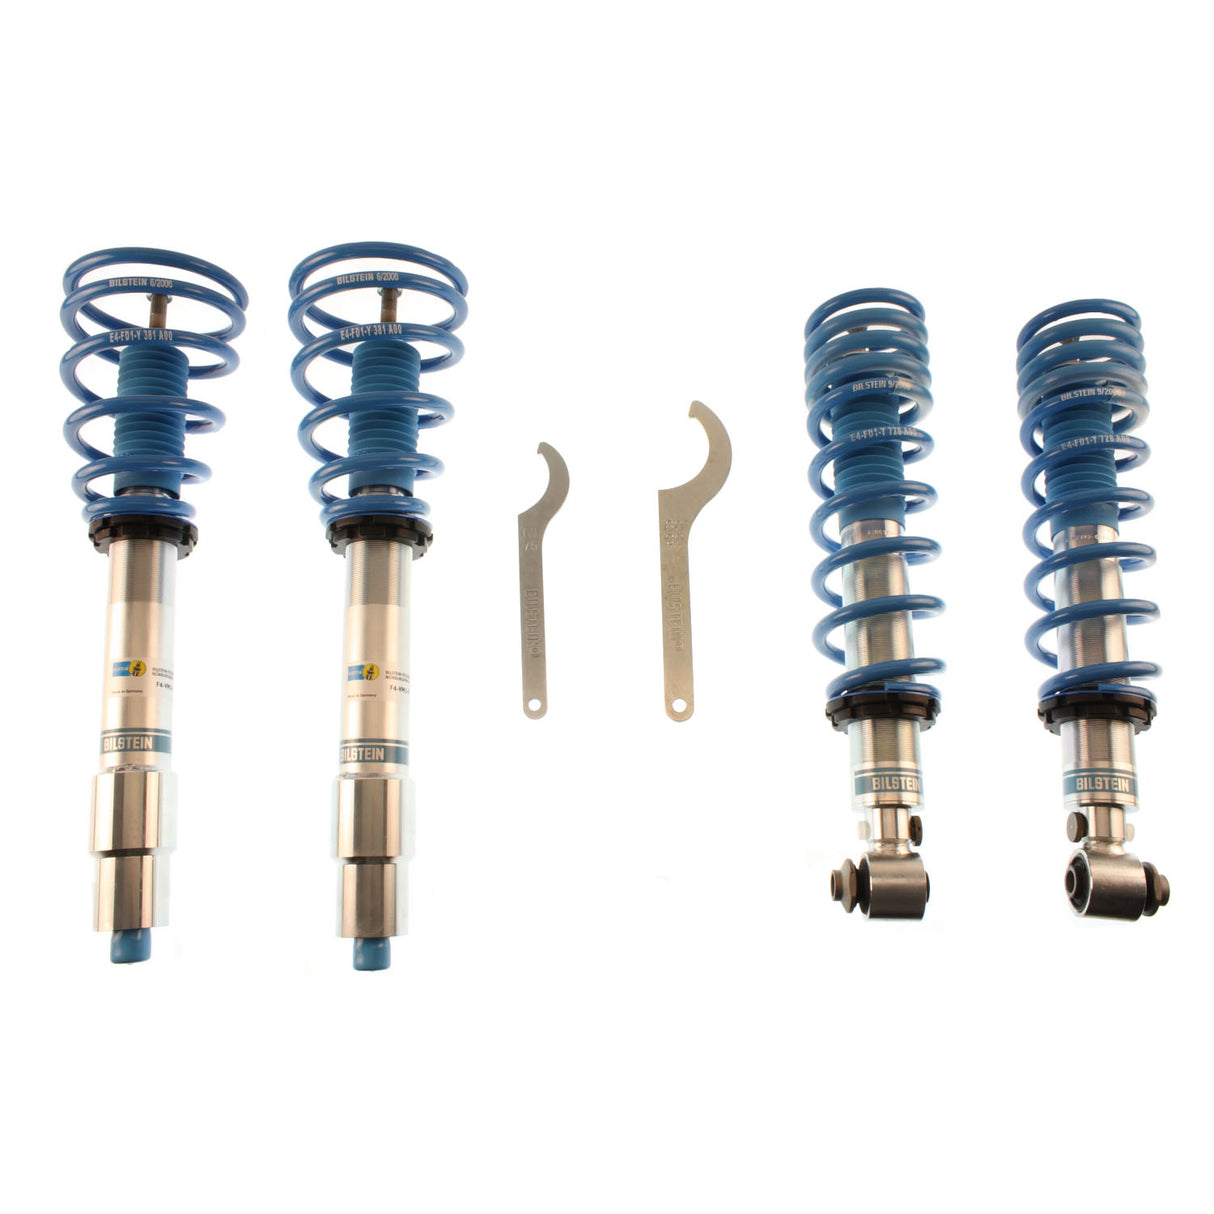 Bilstein F4-GM5-C395-H0 B16 (PSS9) - Suspension Kit - Roam Overland Outfitters